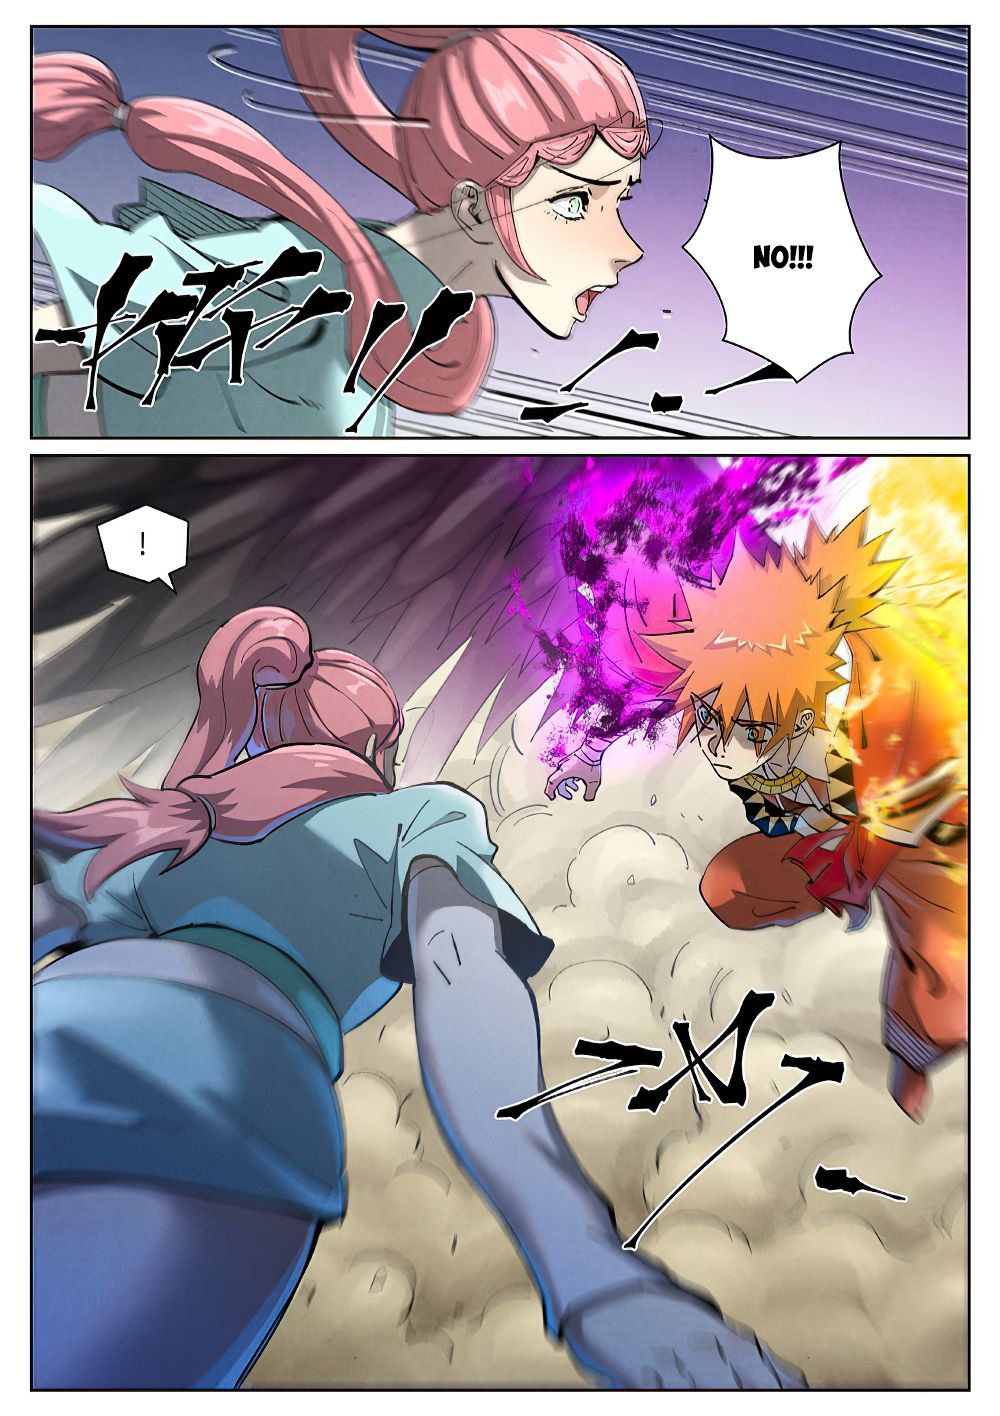 Tales of Demons and Gods Chapter 419.6 - Page 2